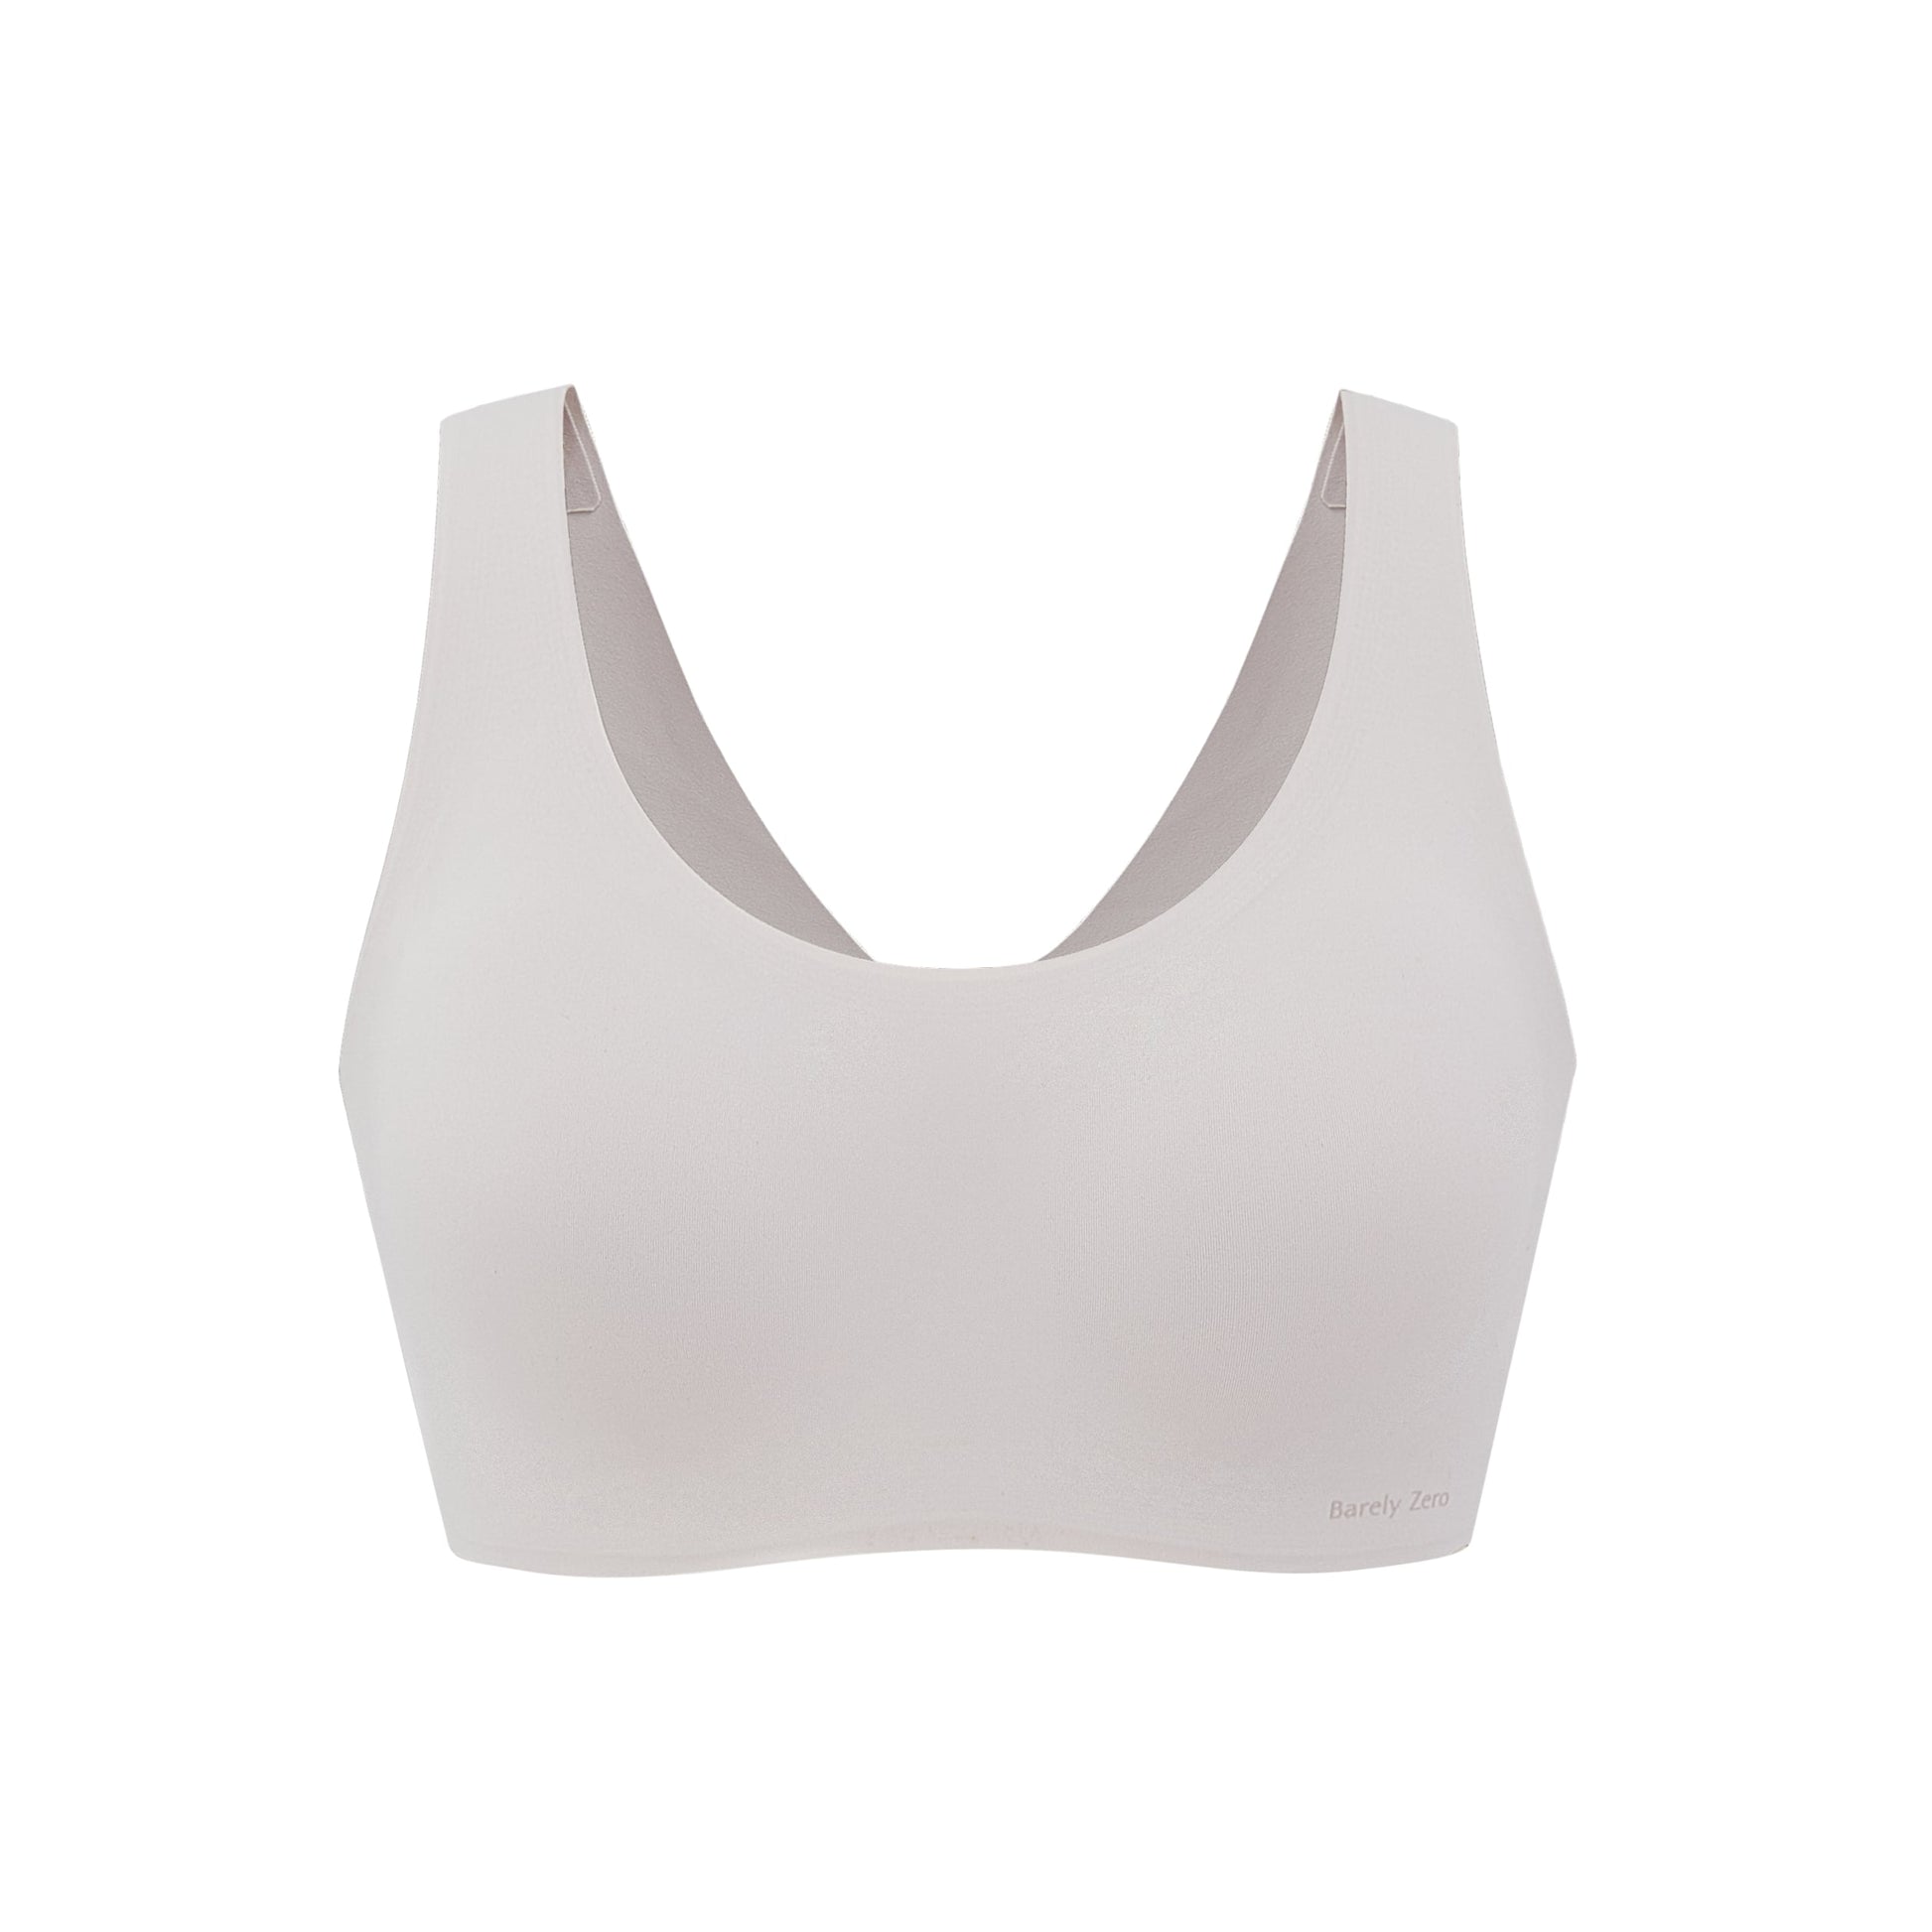 a flay lay image of a light grey Barely Zero Classic Bra, which is a pull-over style with thick stripes.